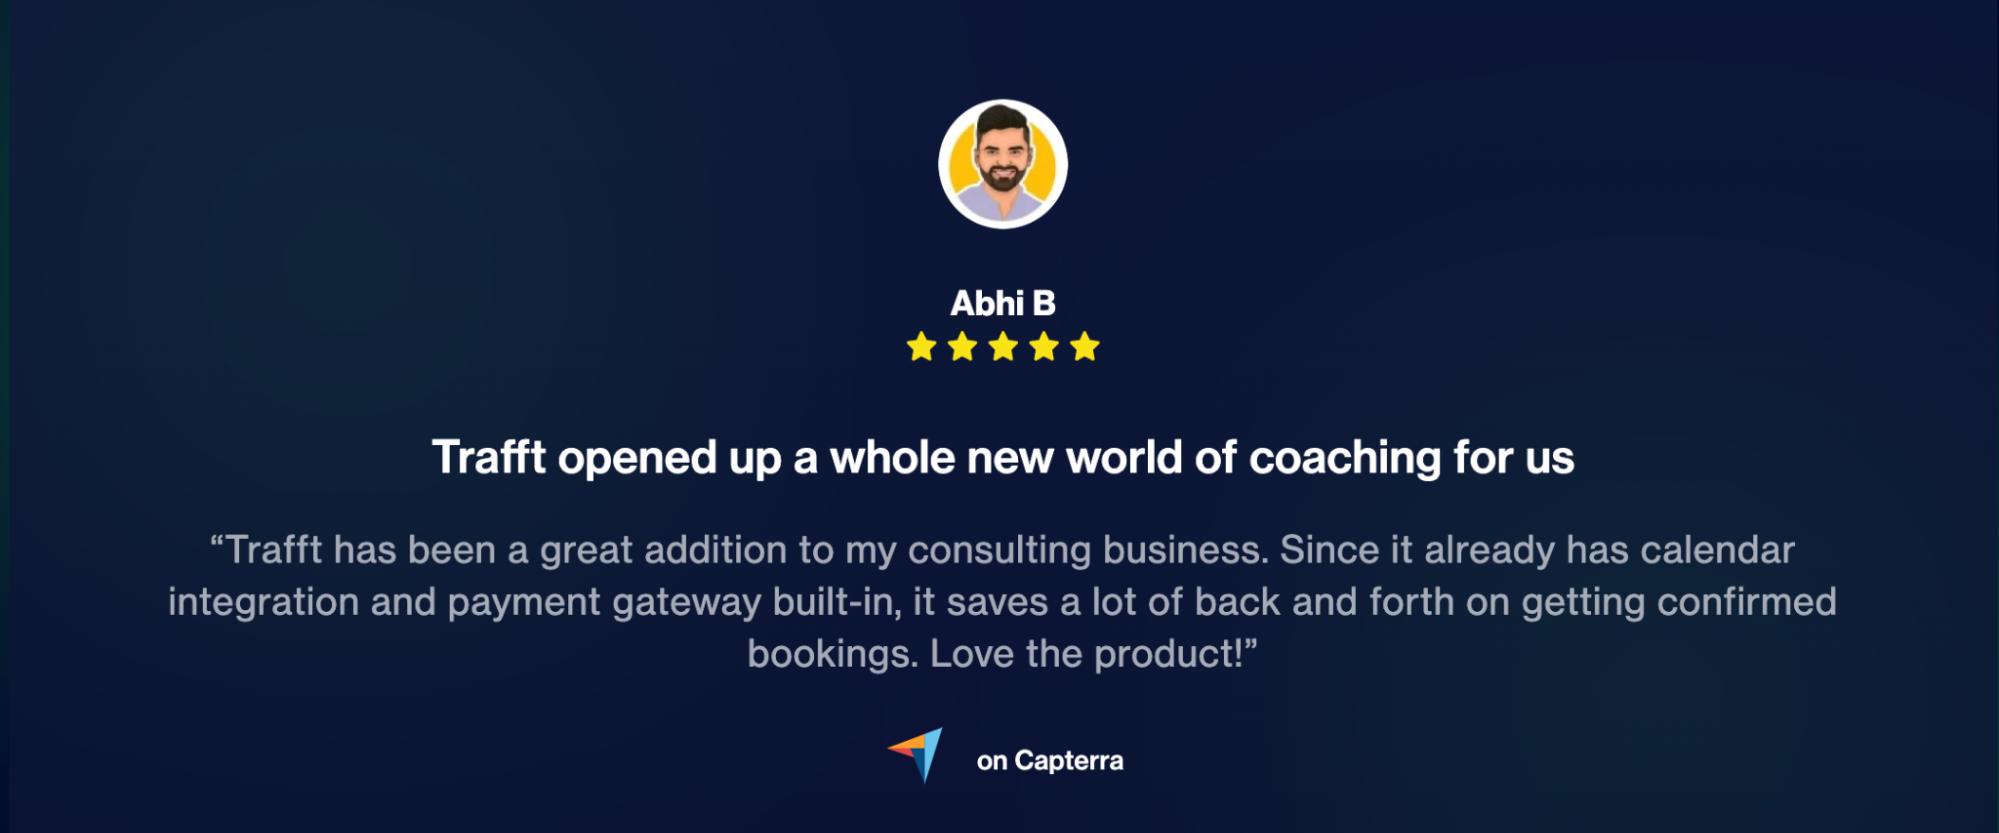 trafft booking solution review left by a successful coach